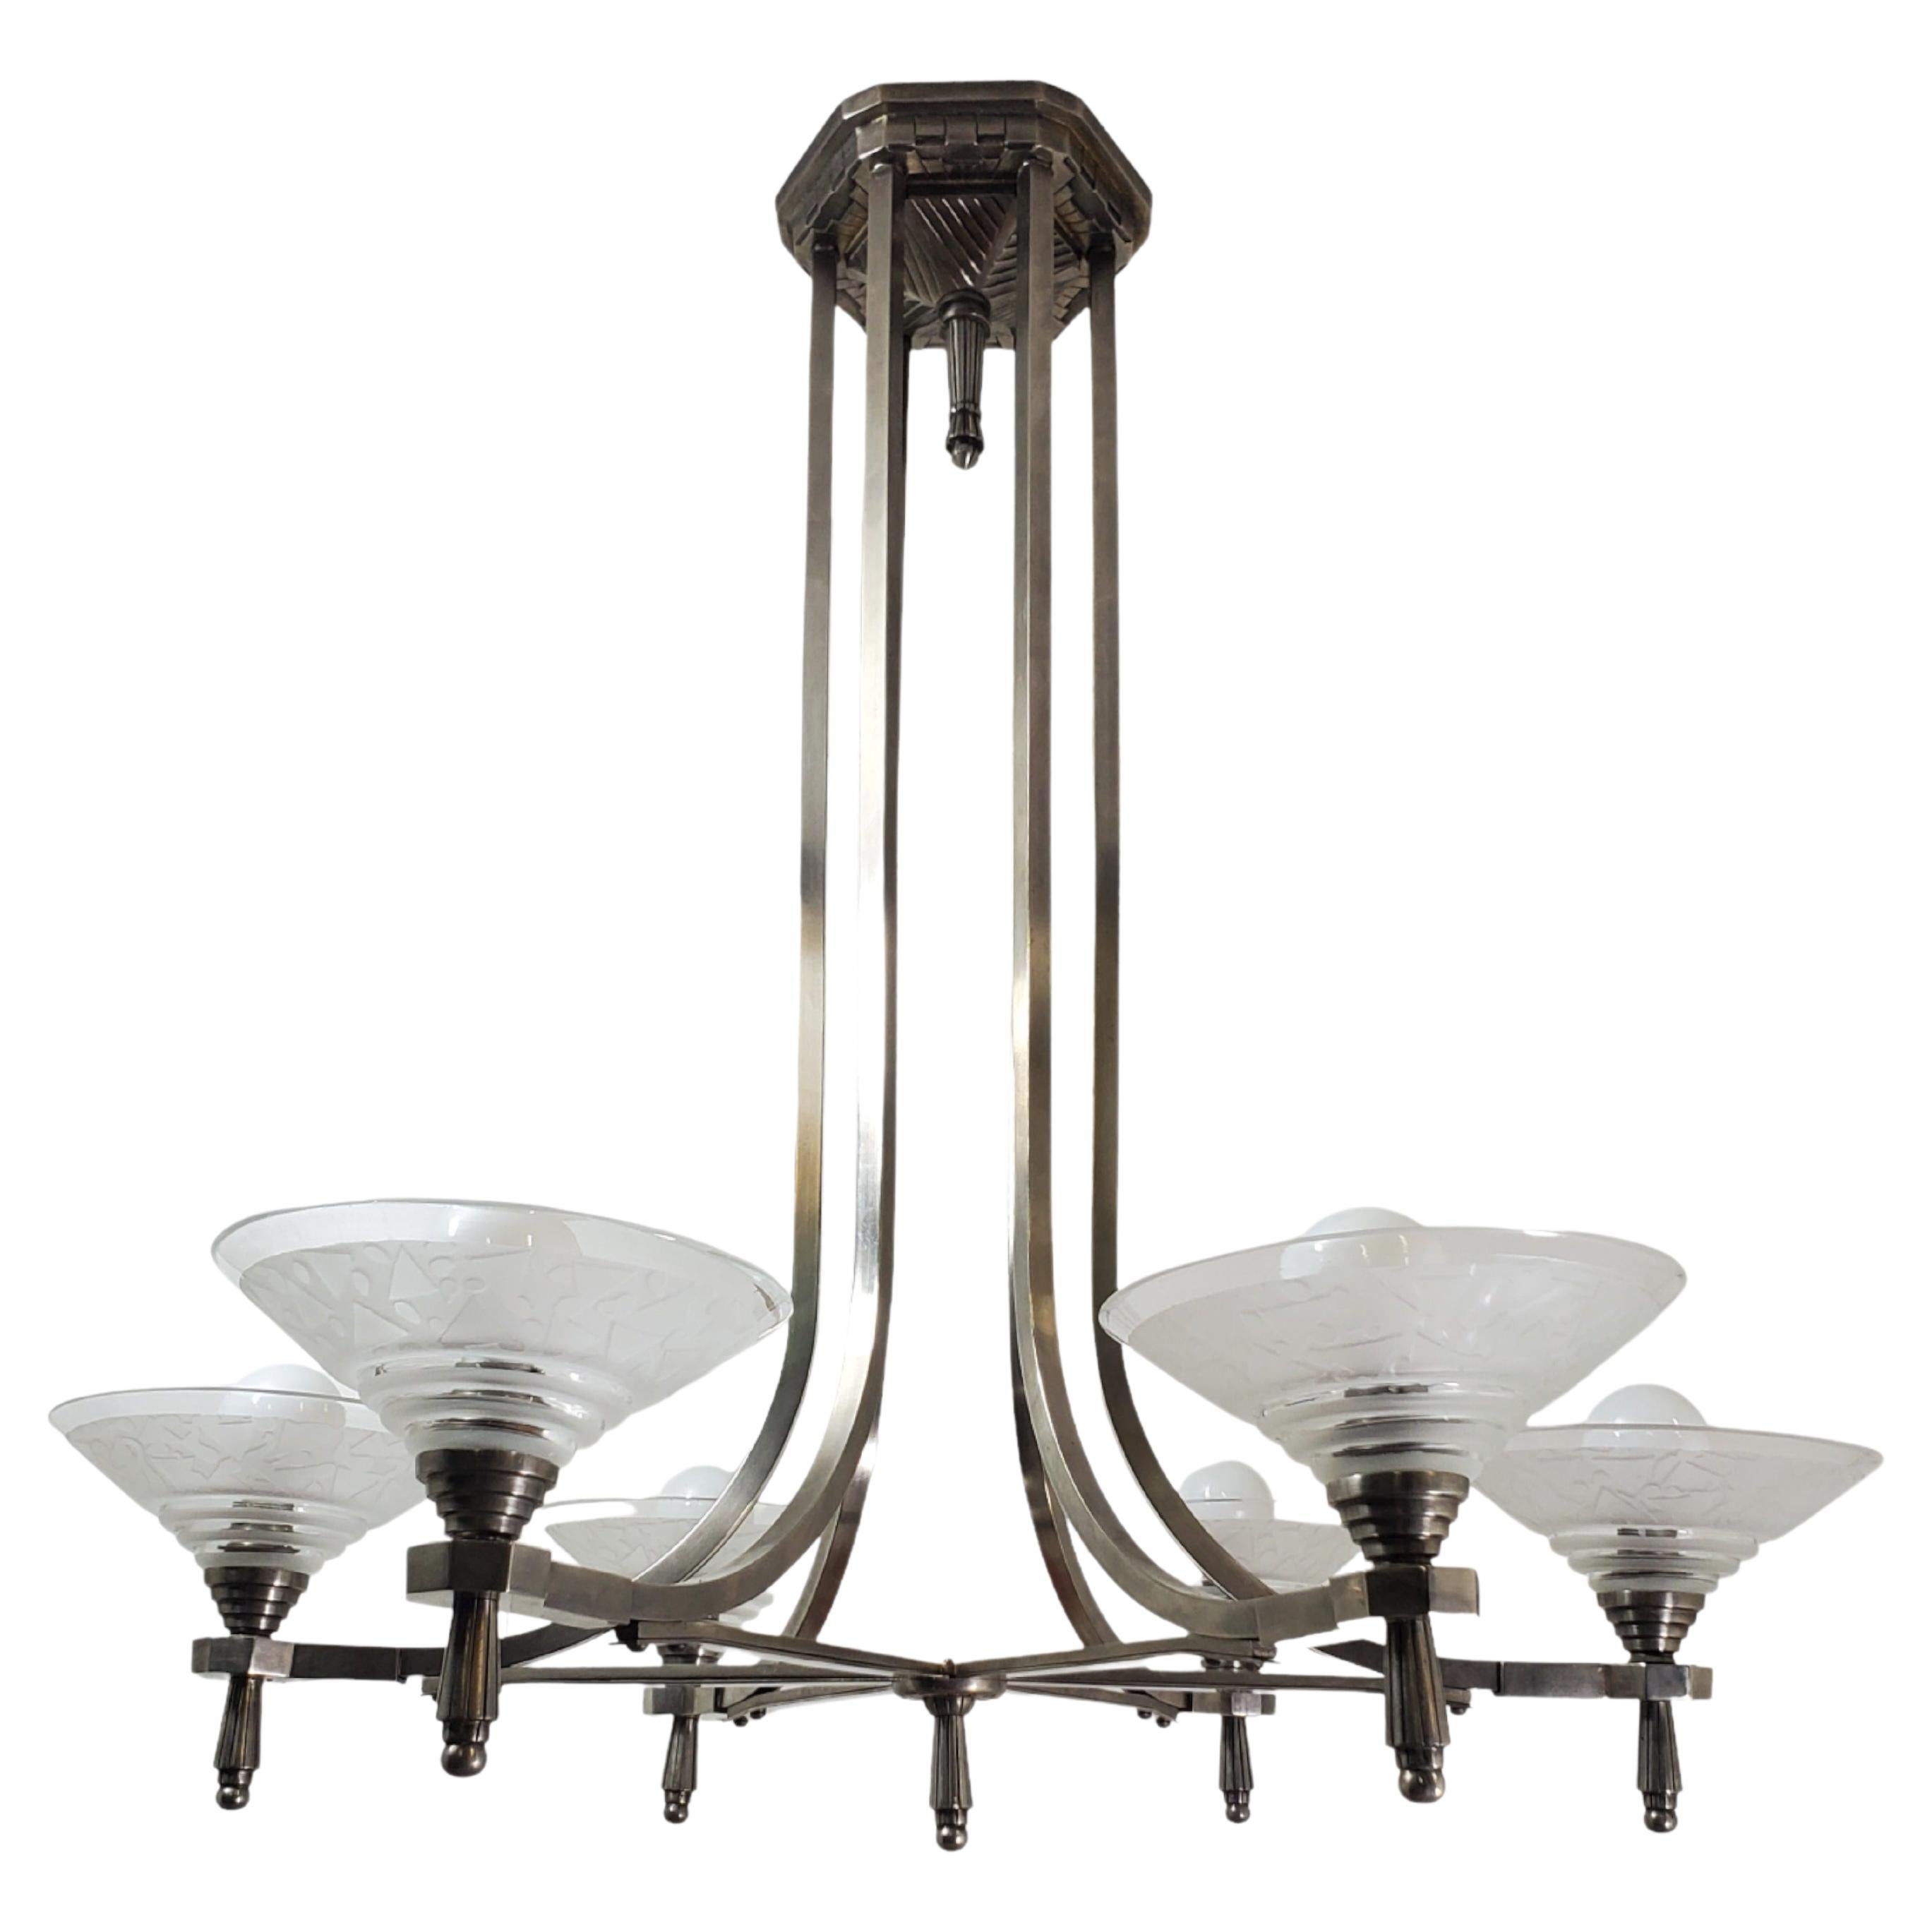 This original and elegant Art Deco chandelier features a nickeled bronzed frame with six branch arms, each gracefully supporting six exquisitely textured acid etched art glass conical cup-shaped shades attributed to Daum Nancy.
The satellite cups